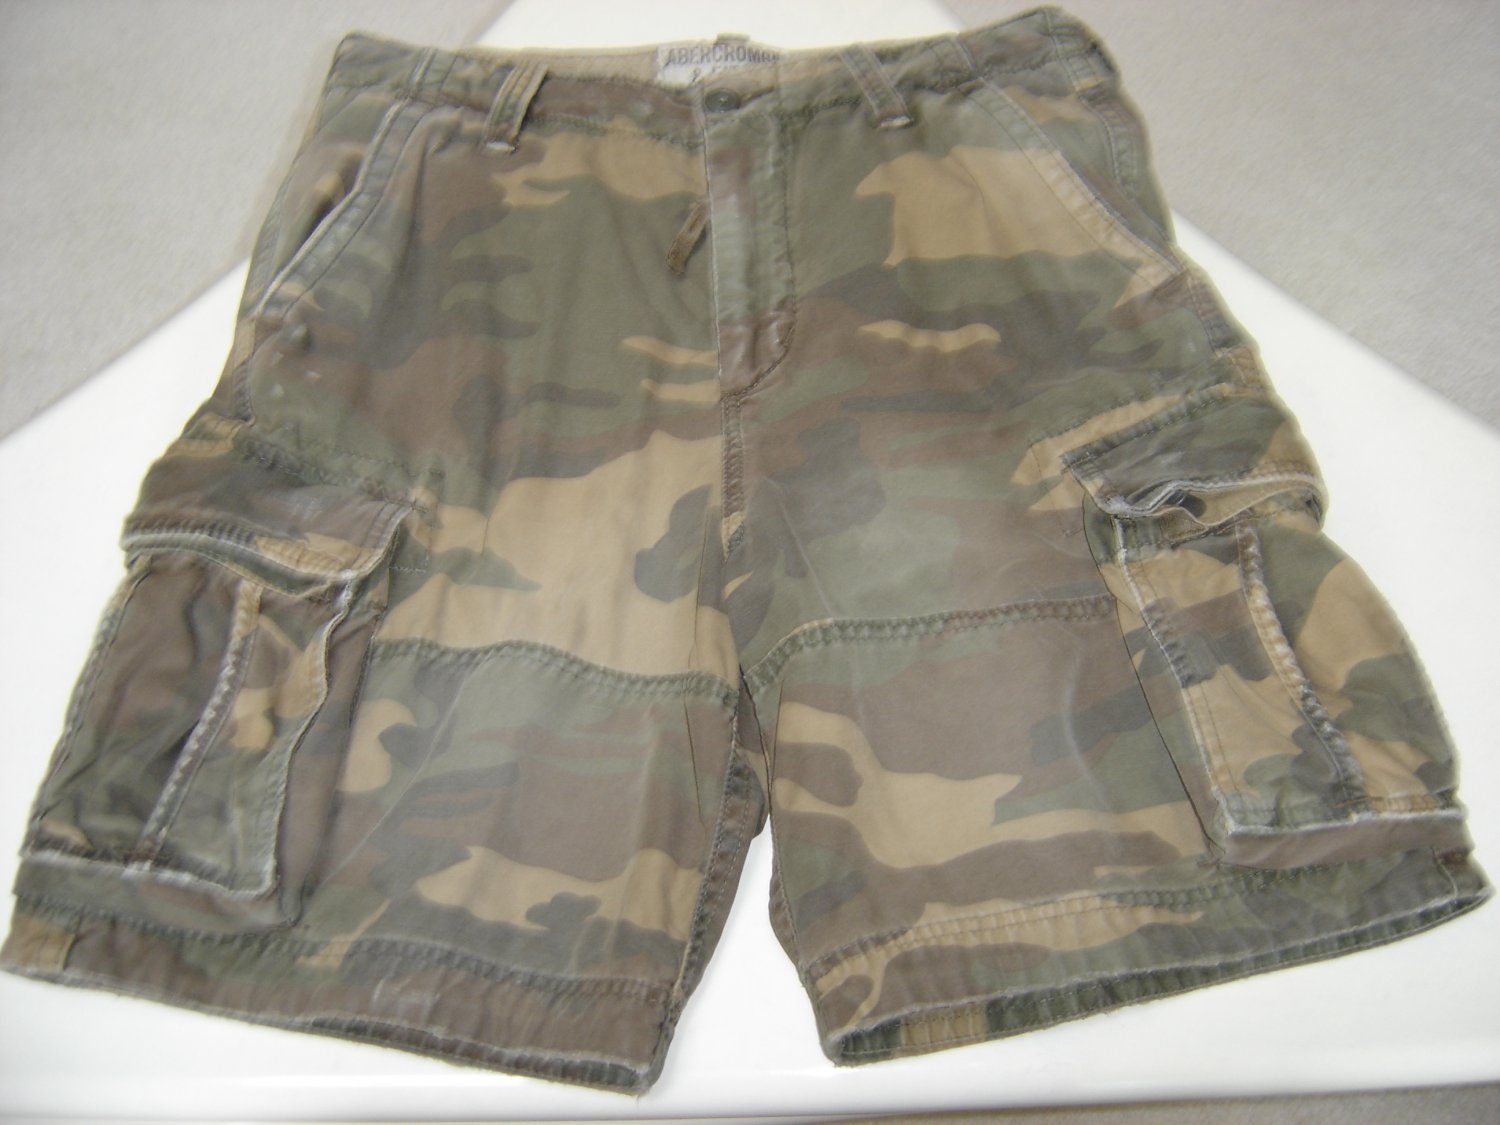 ABERCROMBIE & FITCH A&F MENS MILITARY CAMO CARGO SHORTS - SIZE 34 - WOW!